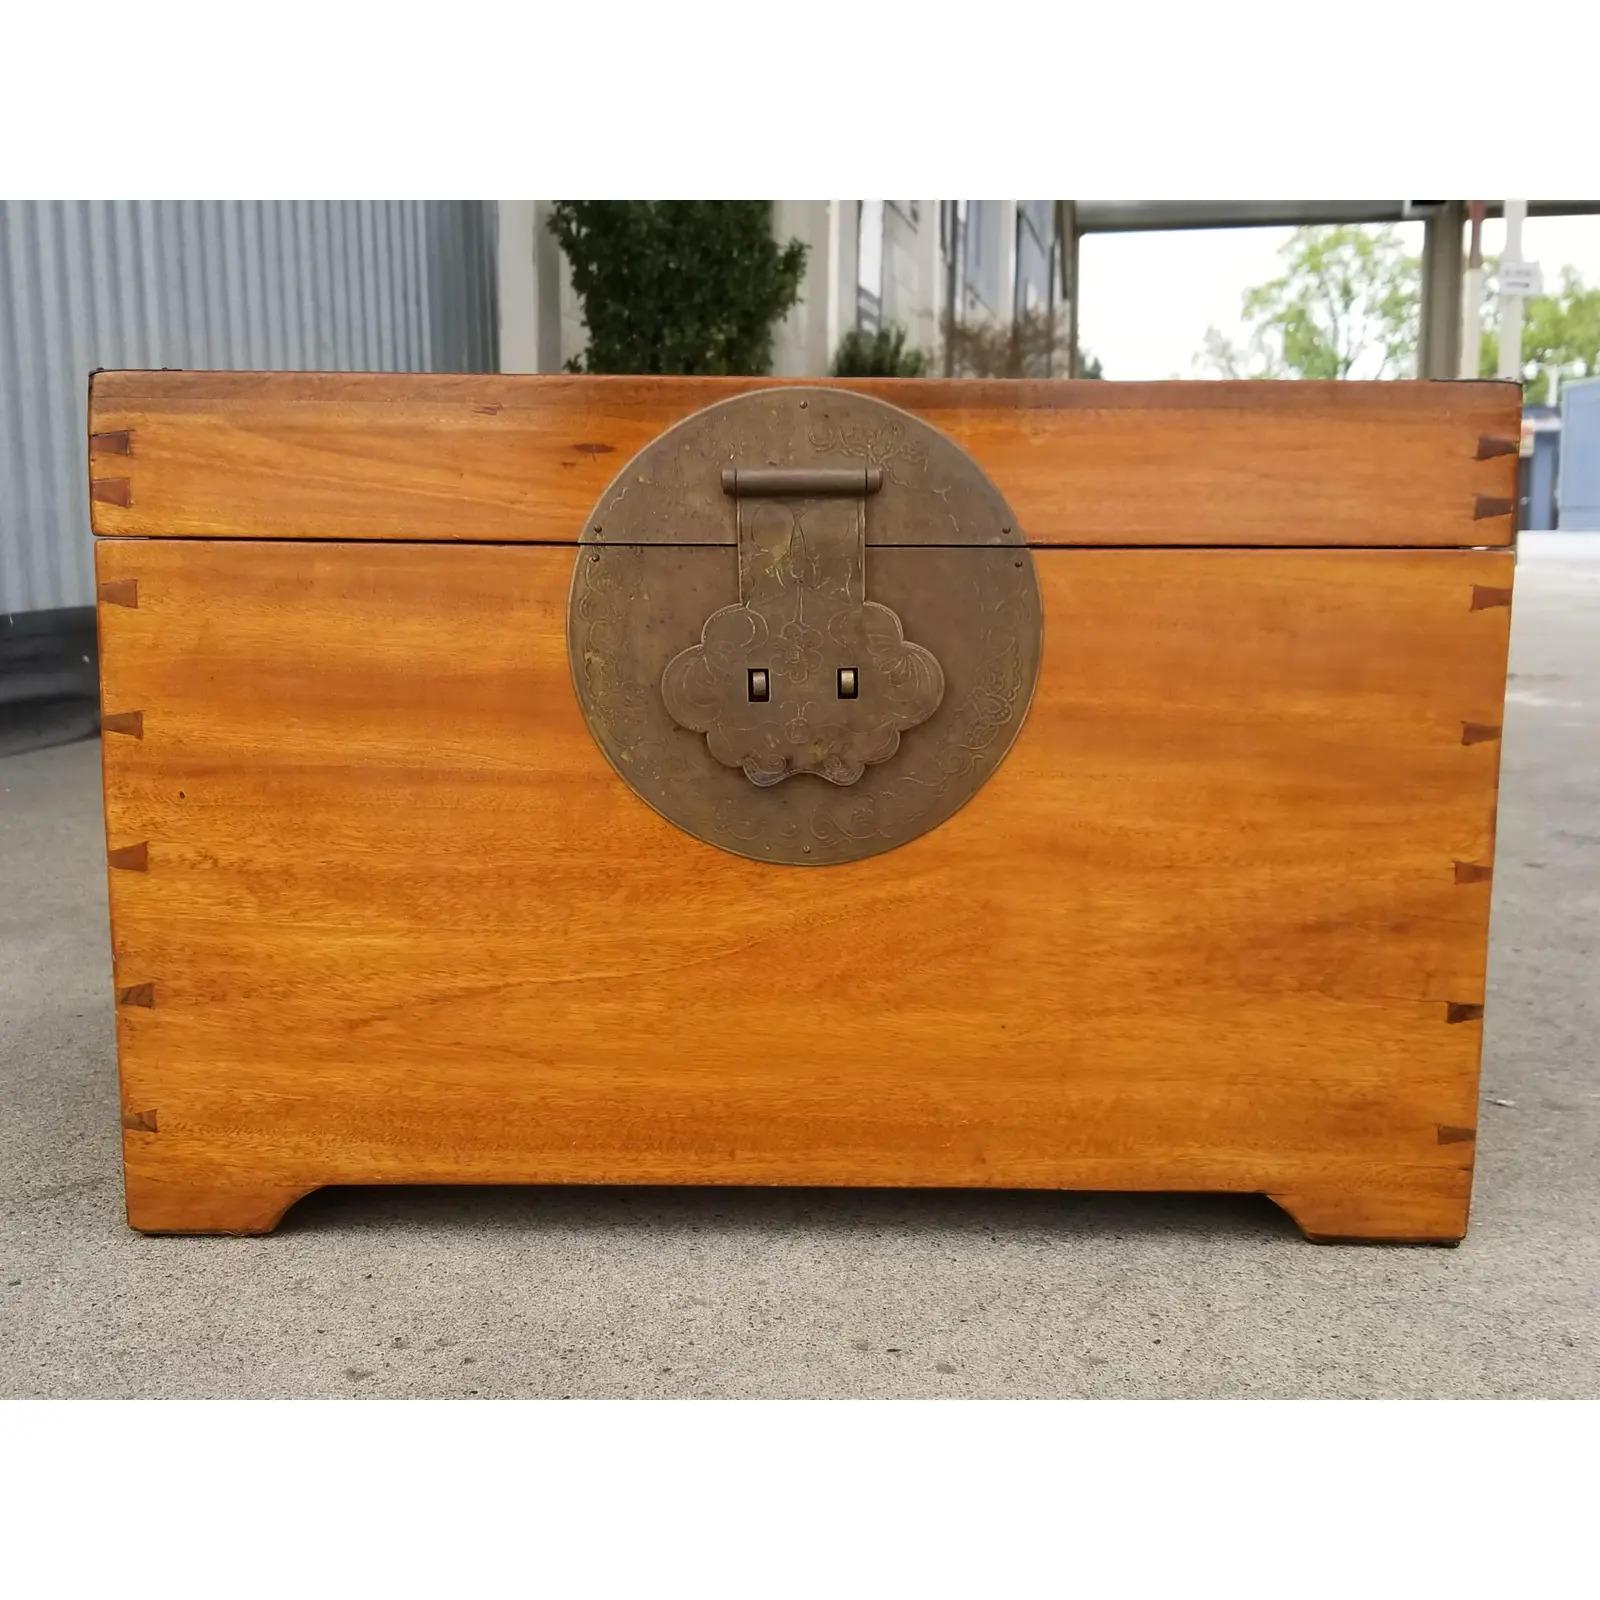 Solid camphor wood trunk with brass detail, hinges and clasp. Figured wood grain with a beautiful, warm glow to finish. Hand dovetail construction, early 20th century. Unusual, smaller size would make an excellent end table with storage capabilities.